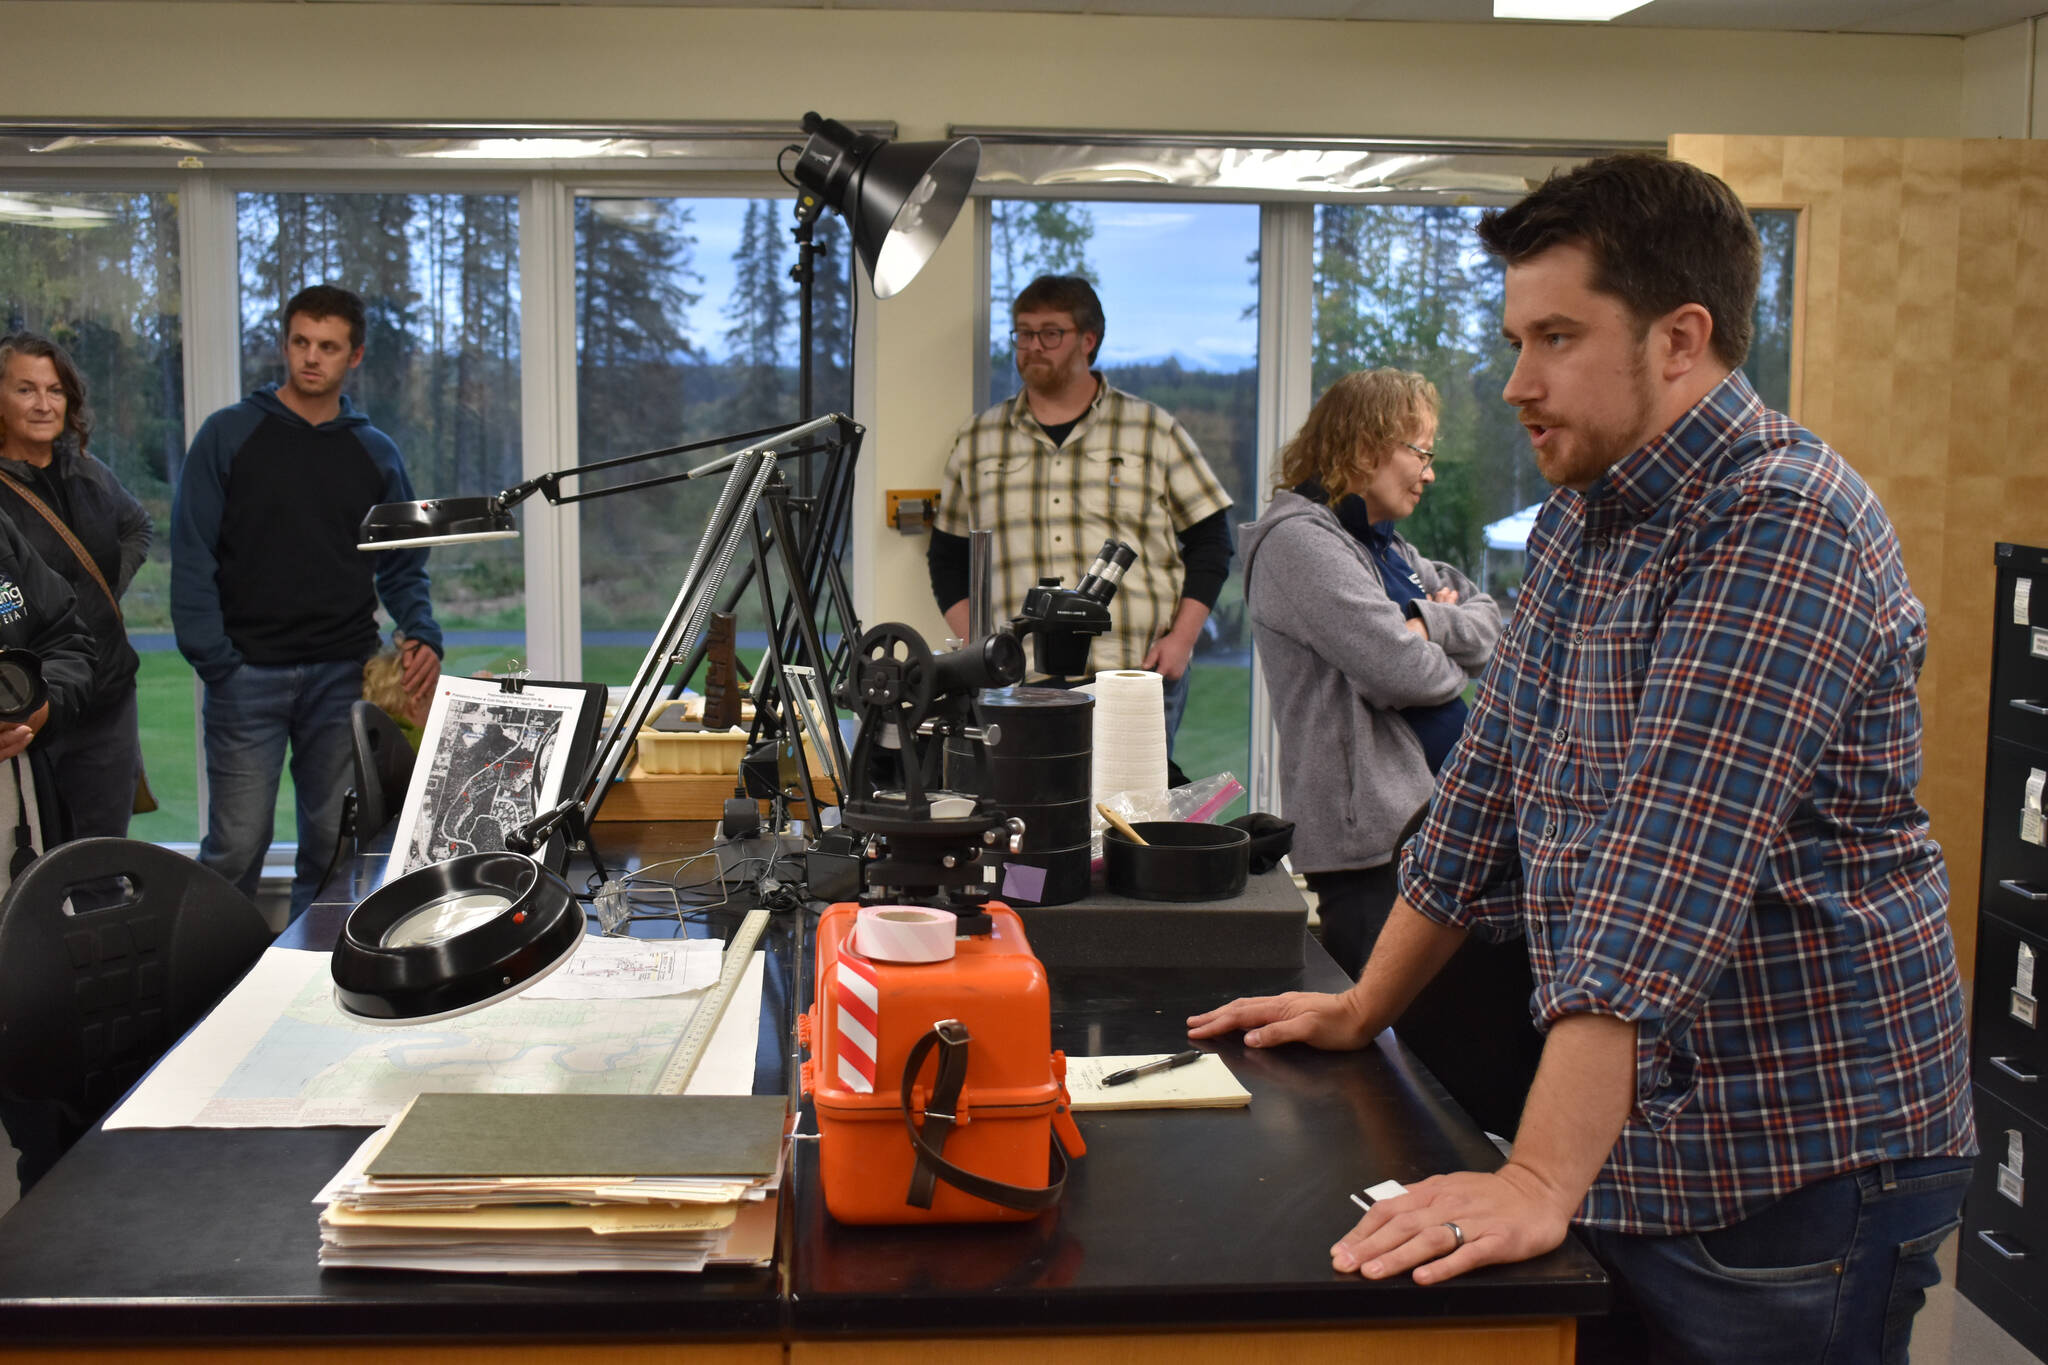 Dr. Adam Dunstan, Assistant Professor of Anthropology at Kenai Peninsula College, gives a tour of the newly dedicated Alan ‘Tiqutsex’ Boraas Anthropology Lab at KPC on Friday, Sept. 16, 2022, in Soldotna, Alaska. (Jake Dye/Peninsula Clarion)